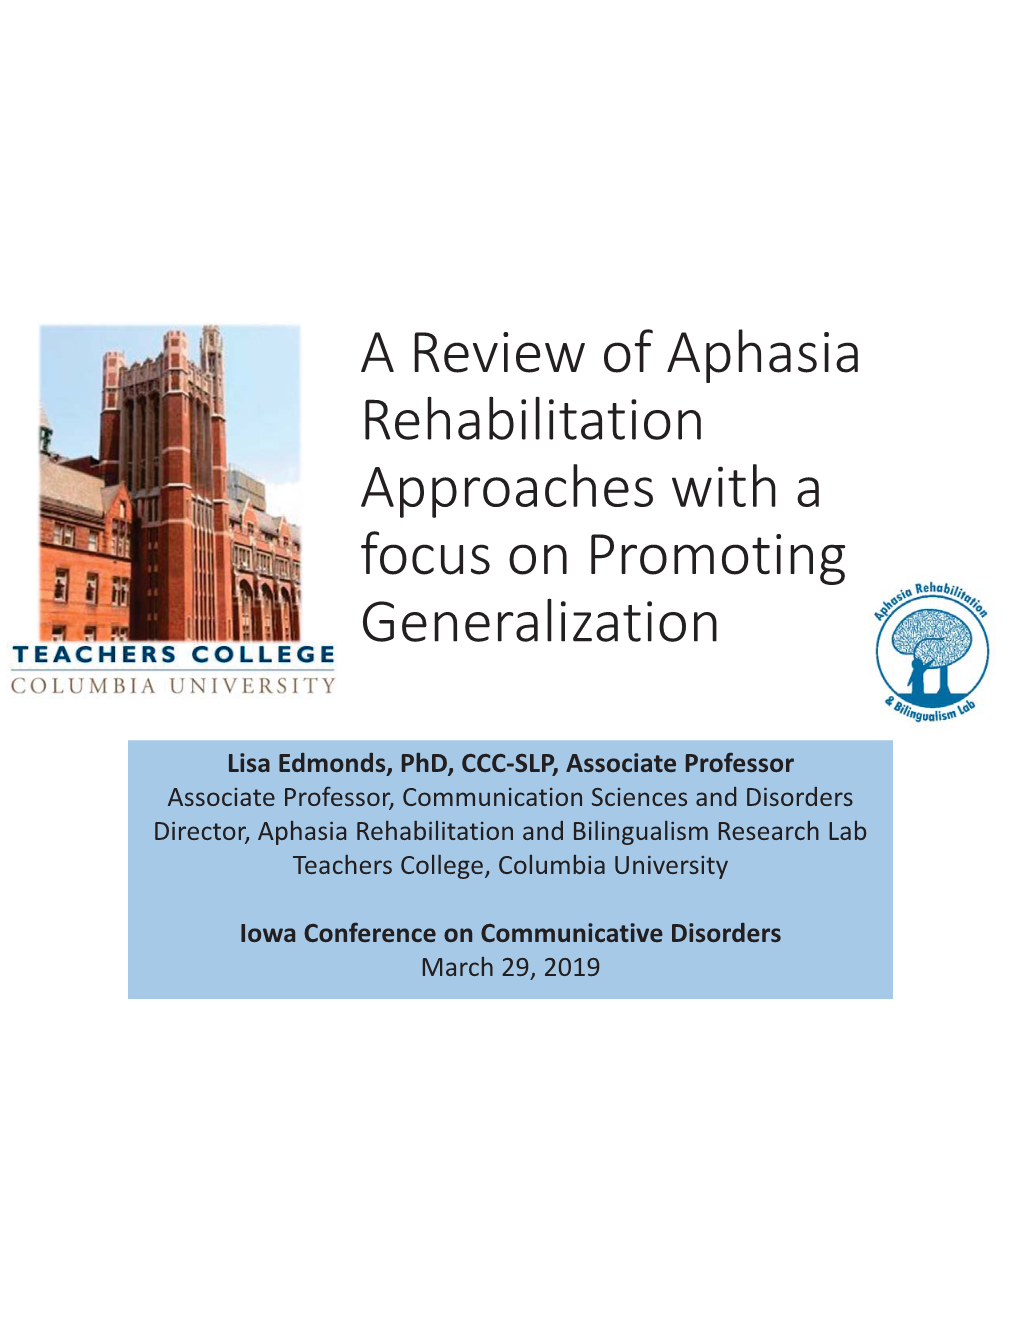 A Review of Aphasia Rehabilitation Approaches with a Focus on Promoting Generalization